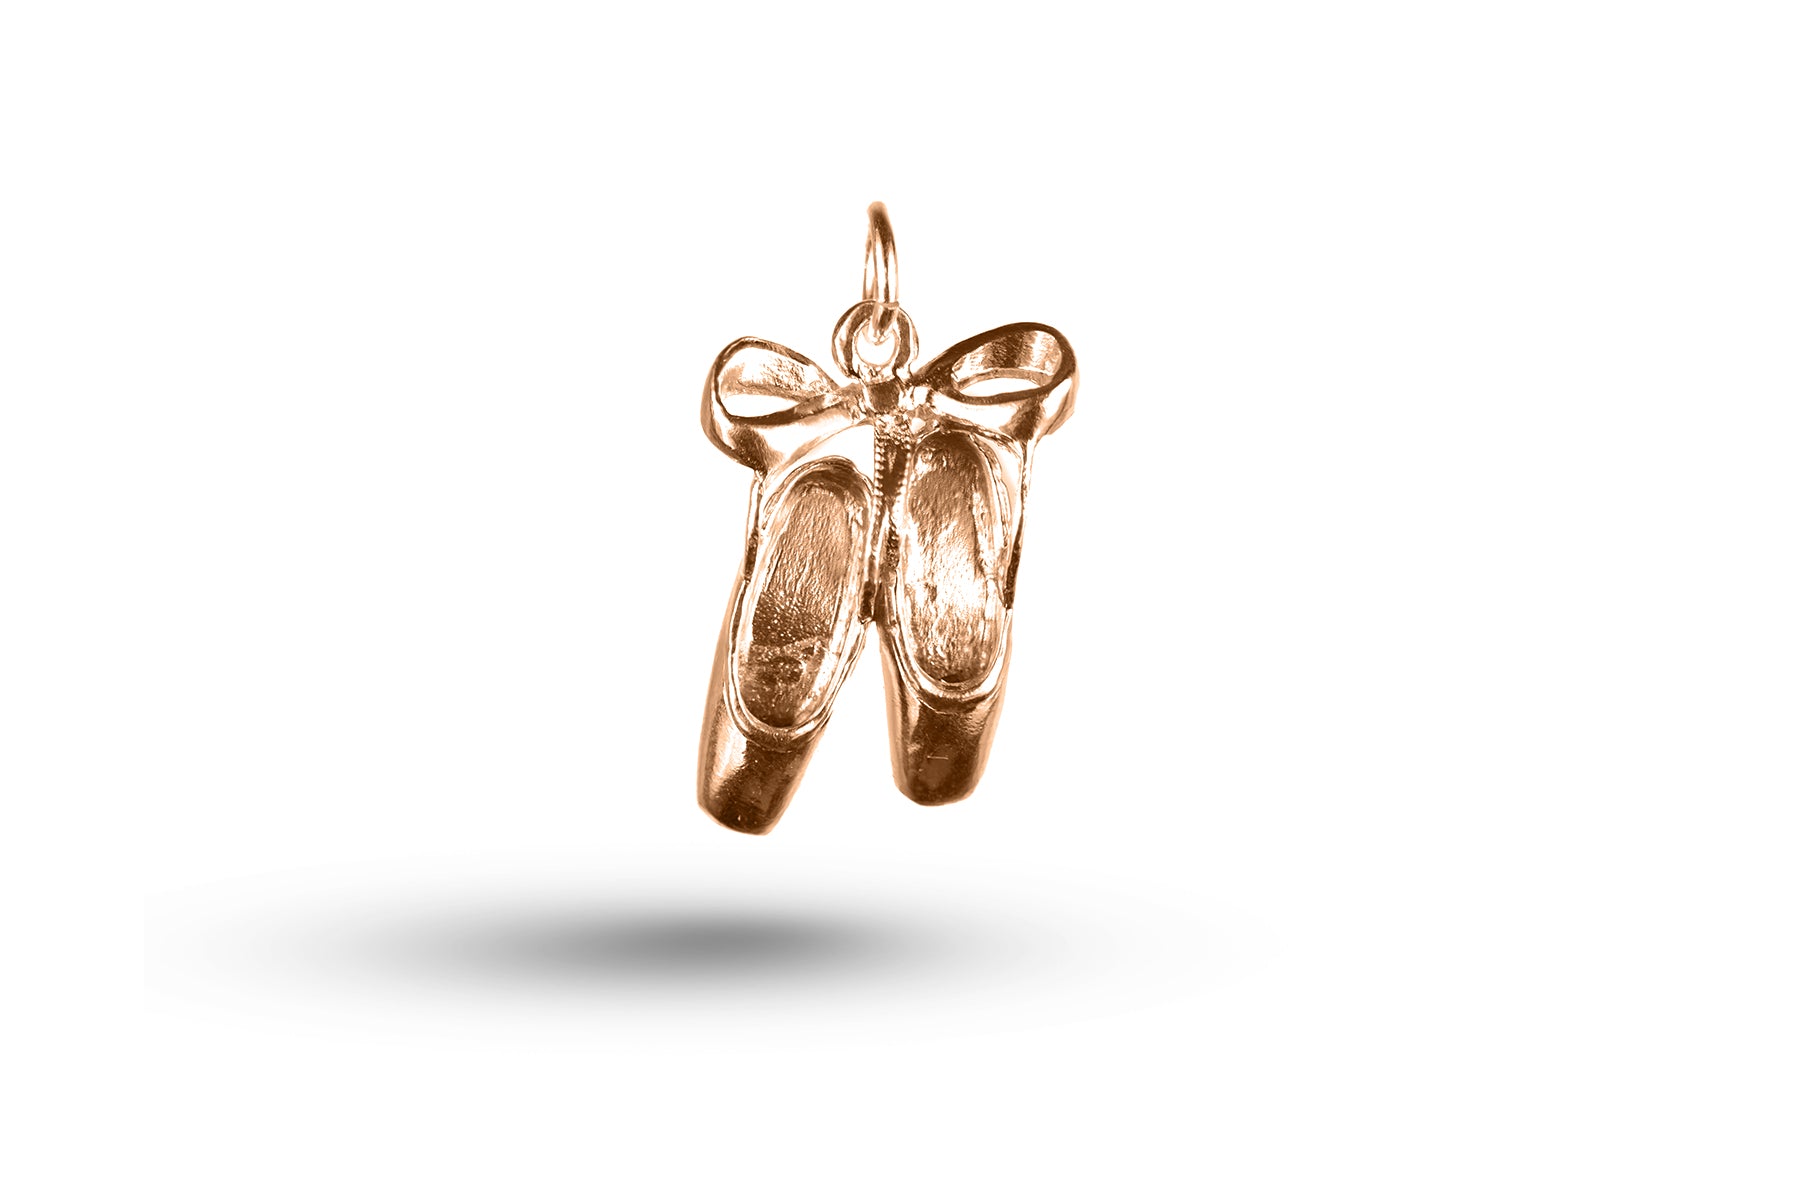 Luxury rose gold Bow Ballet Slippers charm.